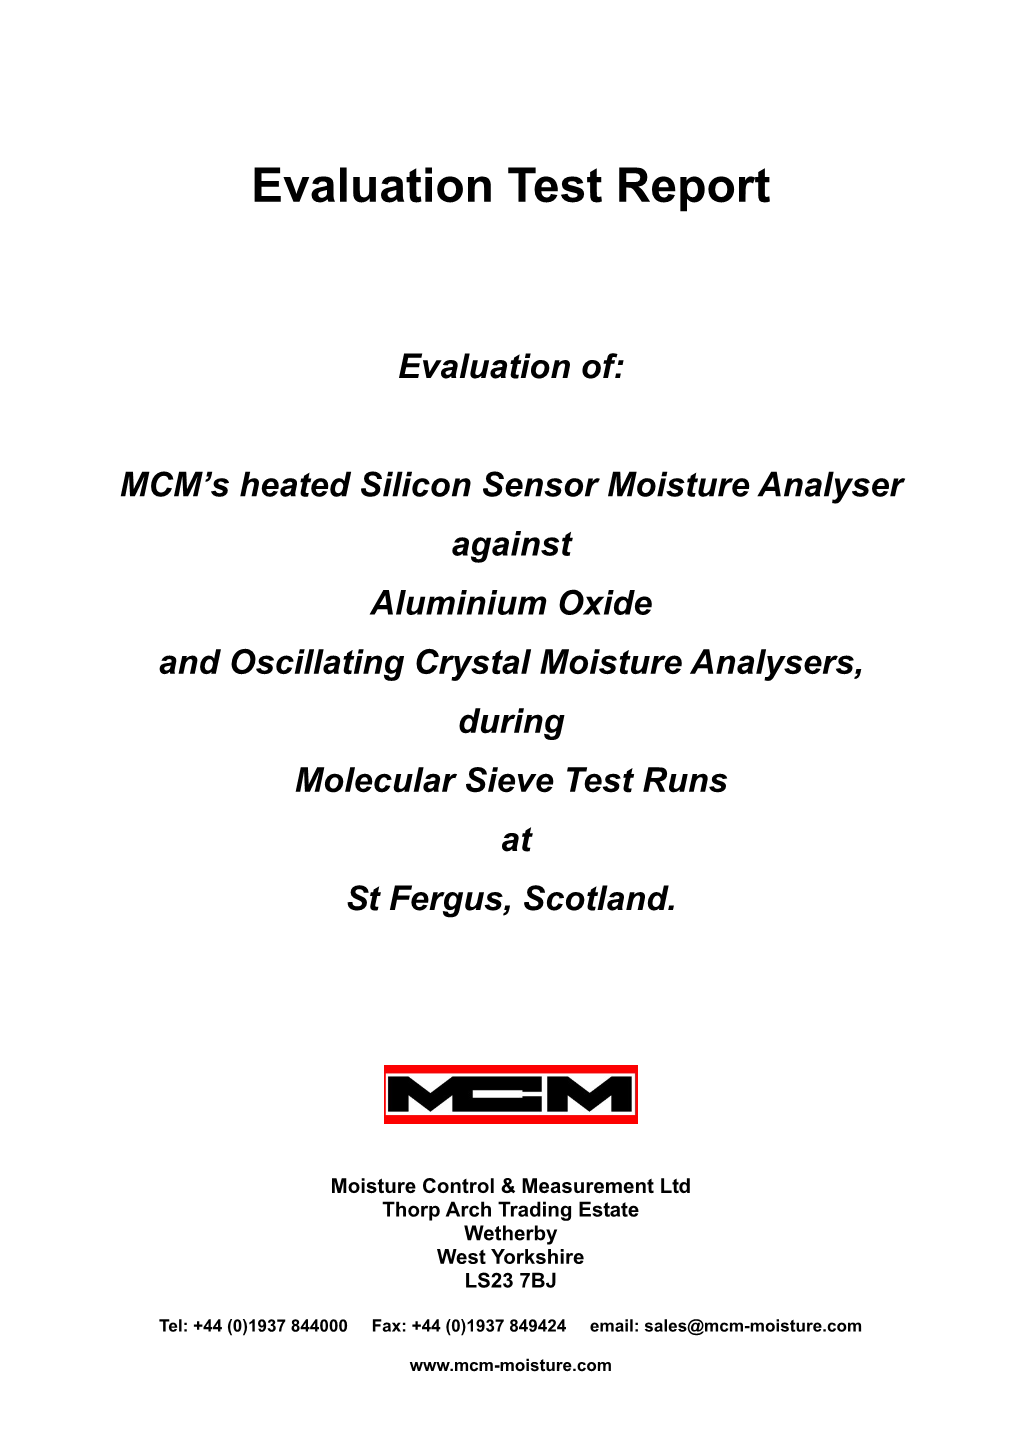 Evaluation of a Heated Silicon Sensor Moisture Analyser Against